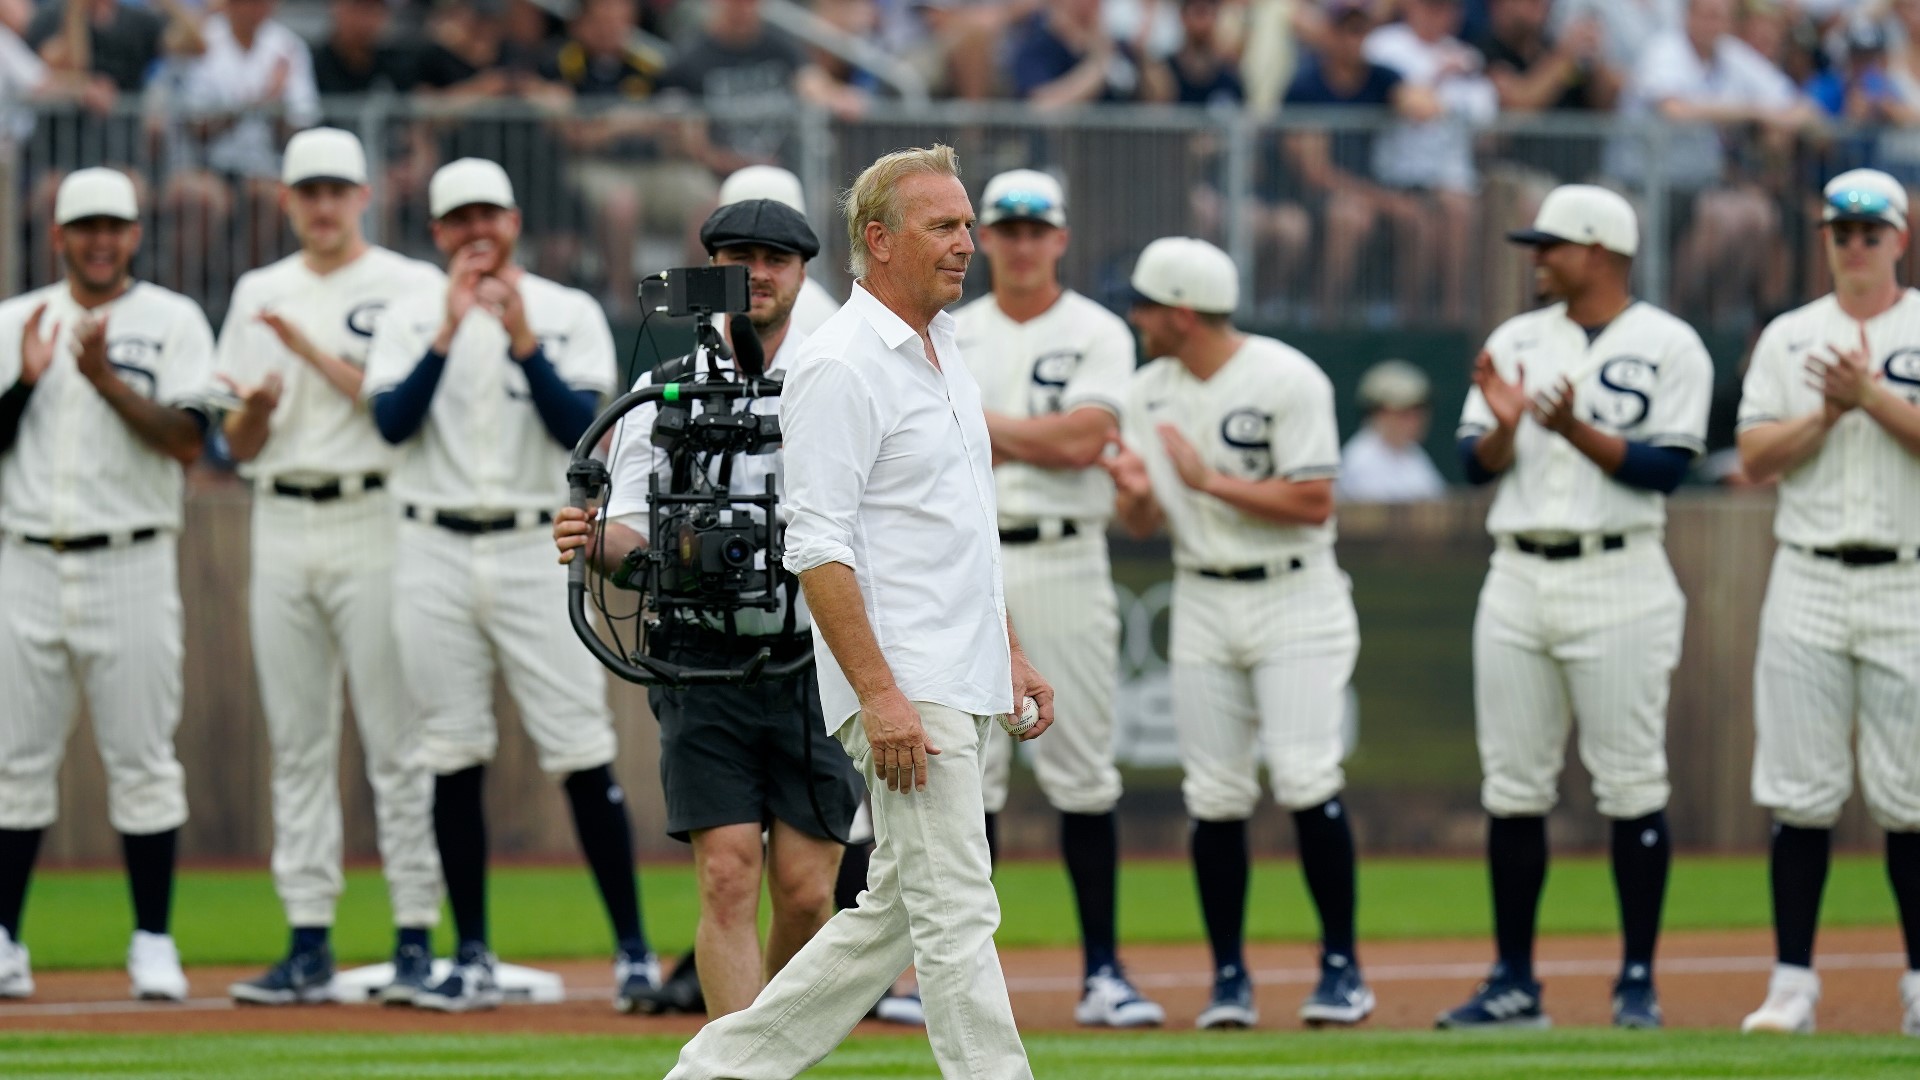 "On the other side of that corn we filmed a movie that stood the test of time," Costner said to open Thursday night's game.